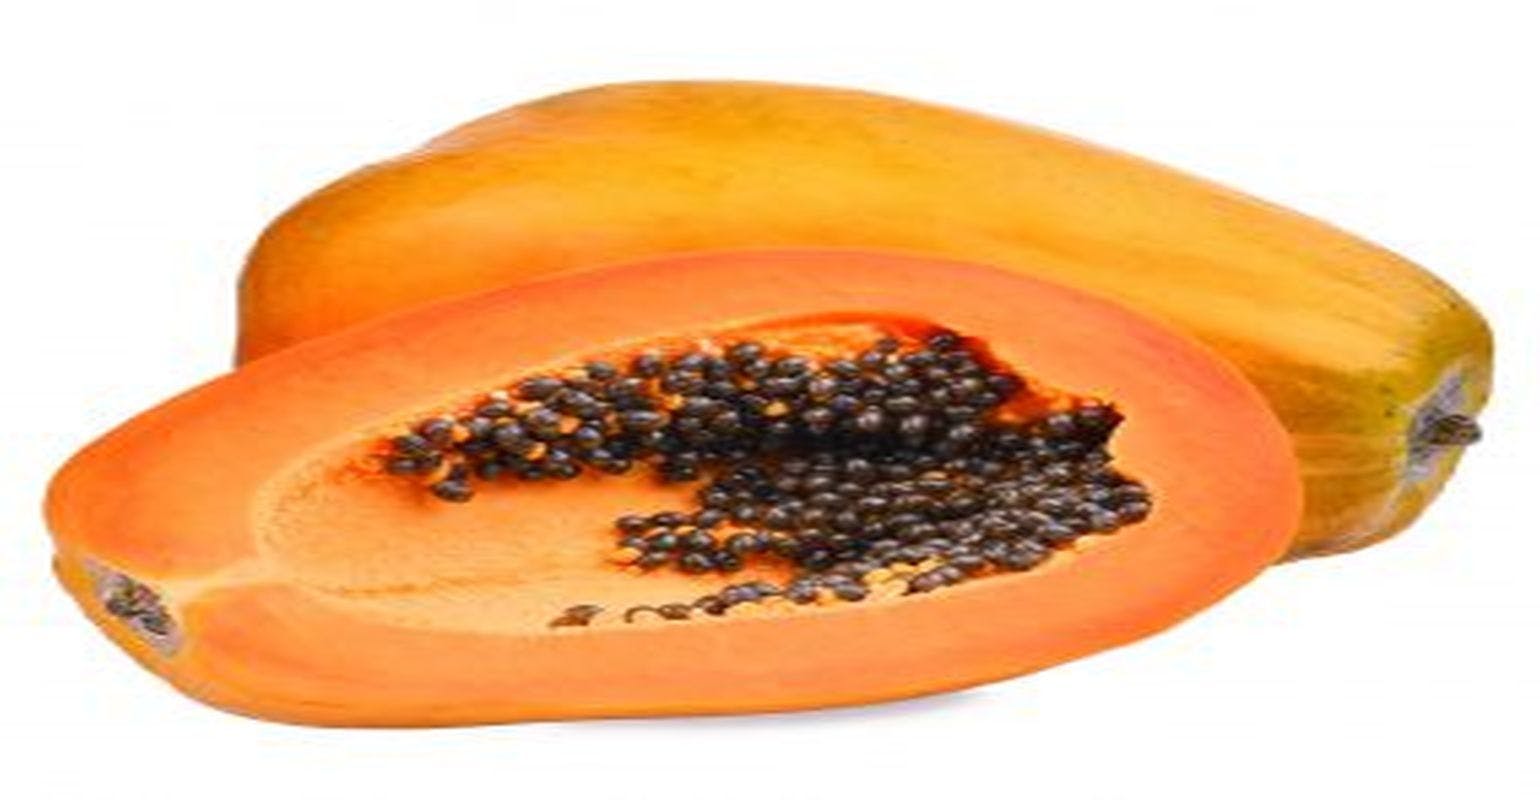 Outbreak of Salmonella Infections Linked to Whole, Fresh Papayas Imported from Mexico